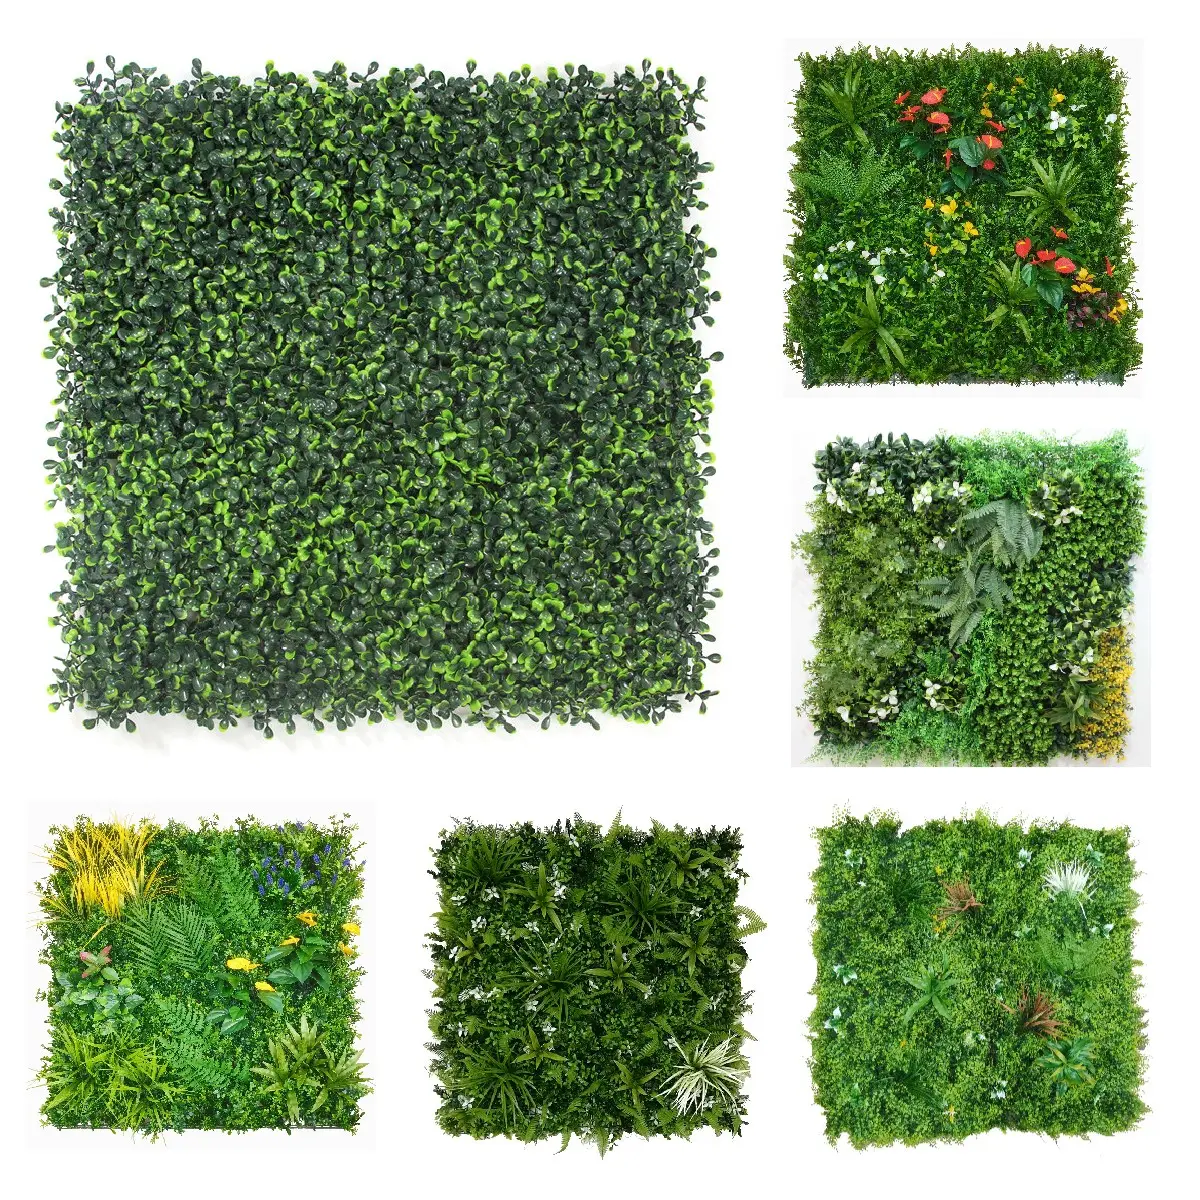 Artificial Boxwood Panel Artificial Boxwood Panel Vertical Green Wall Outdoor Fence Panels Artificial Foliage Grass Hedge Fence Plante Artificielle